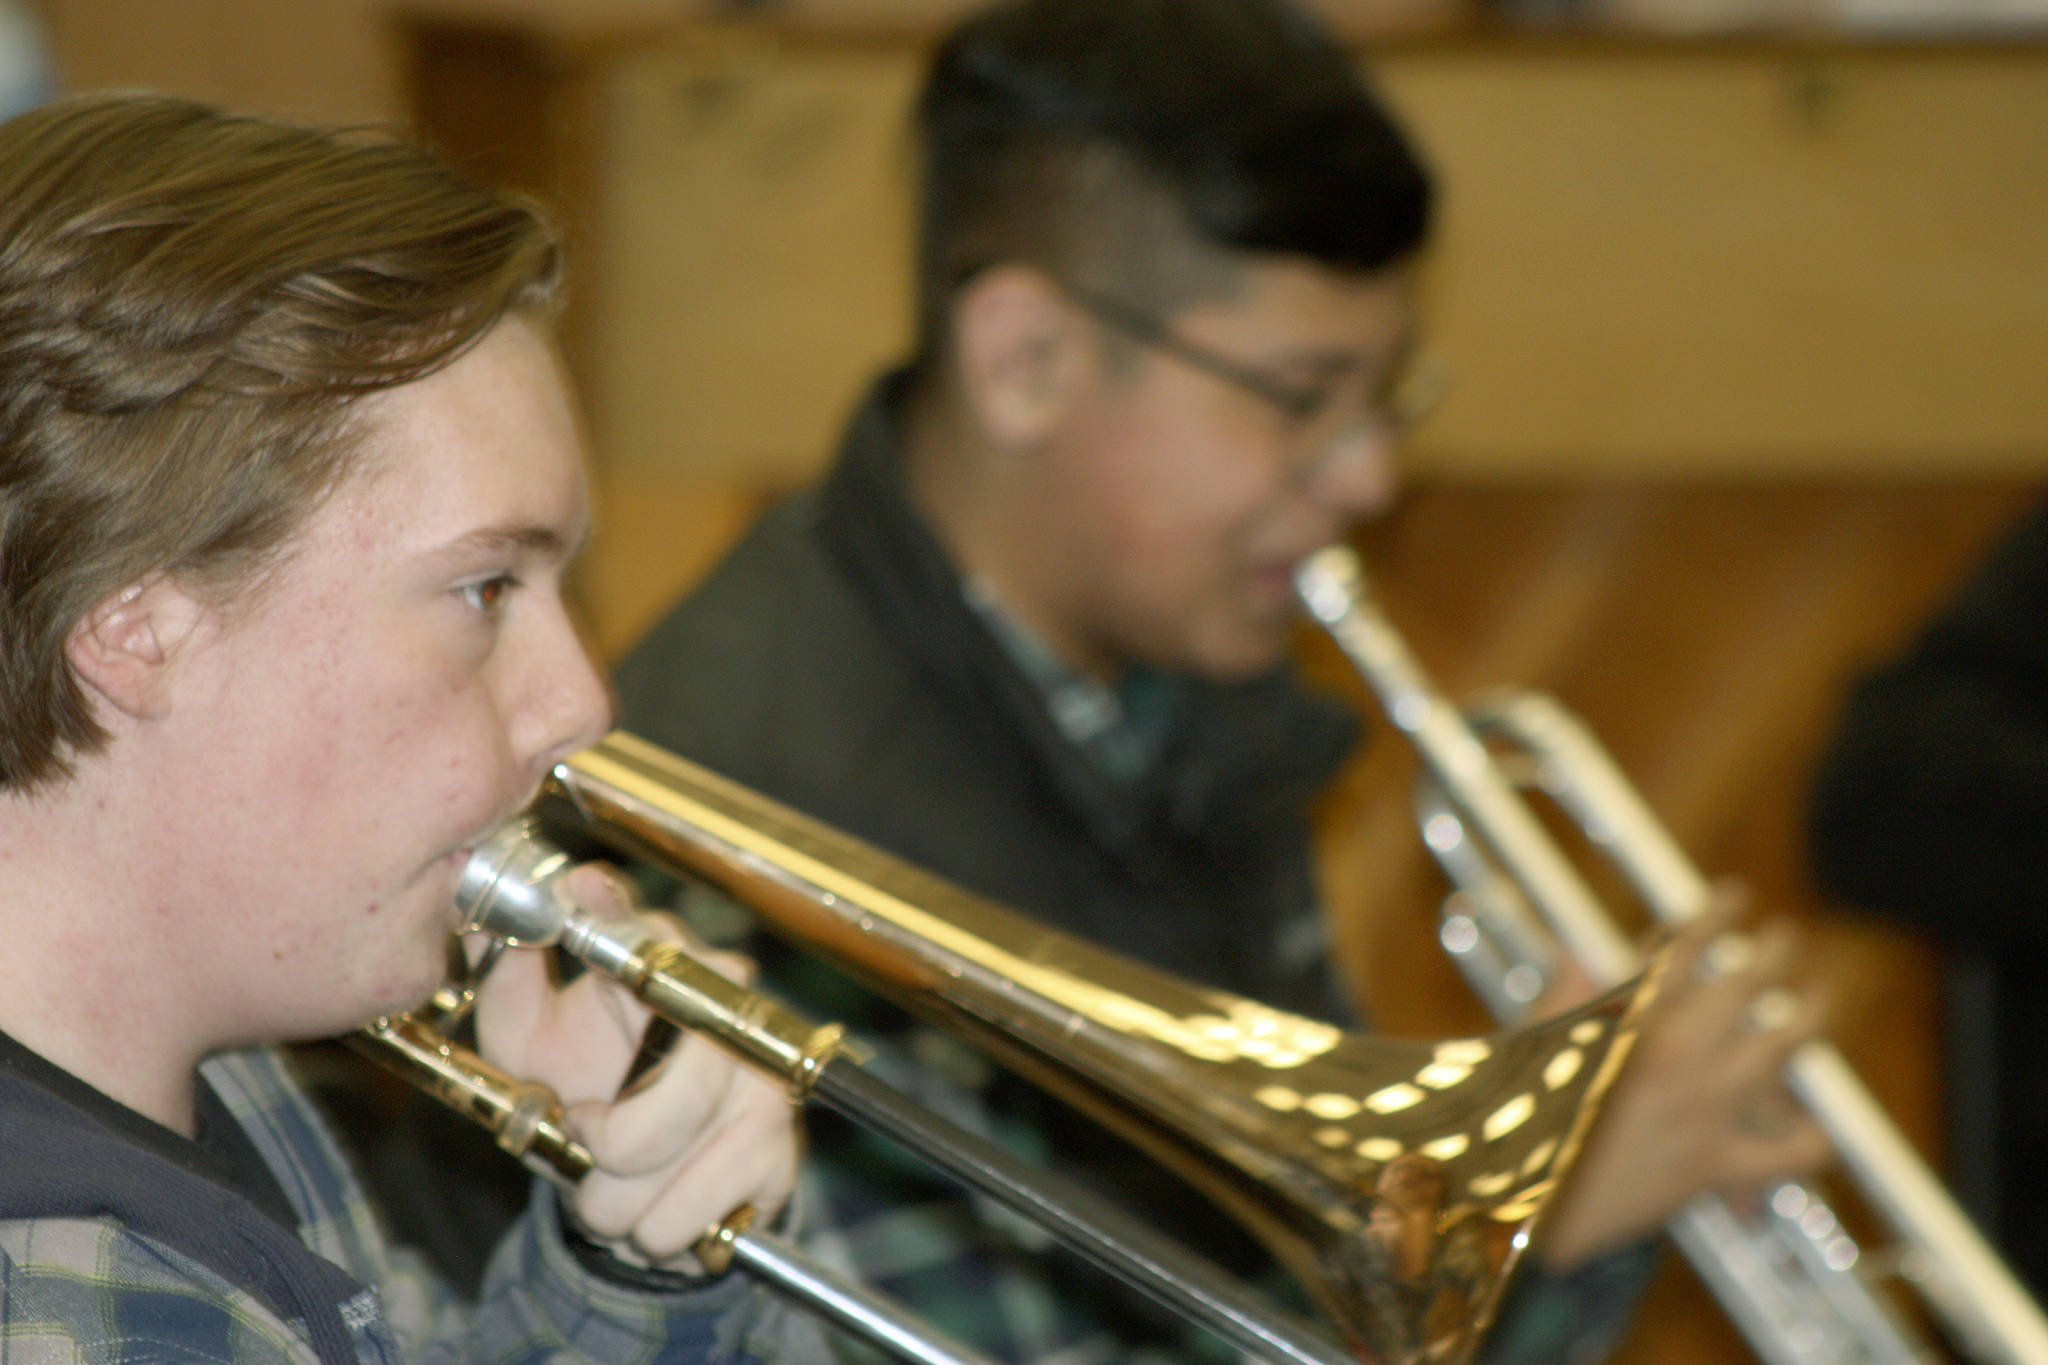 Auburn Riverside’s Riley Nutter (trombone), left, and Jose De la Cruz (trumpet) practice their music. The two student musicians will join the school’s large contingent bound for New York City’s Carnegie Hall and the National Band & Orchestra Festival on April 8-11. MARK KLAAS, Auburn Reporter